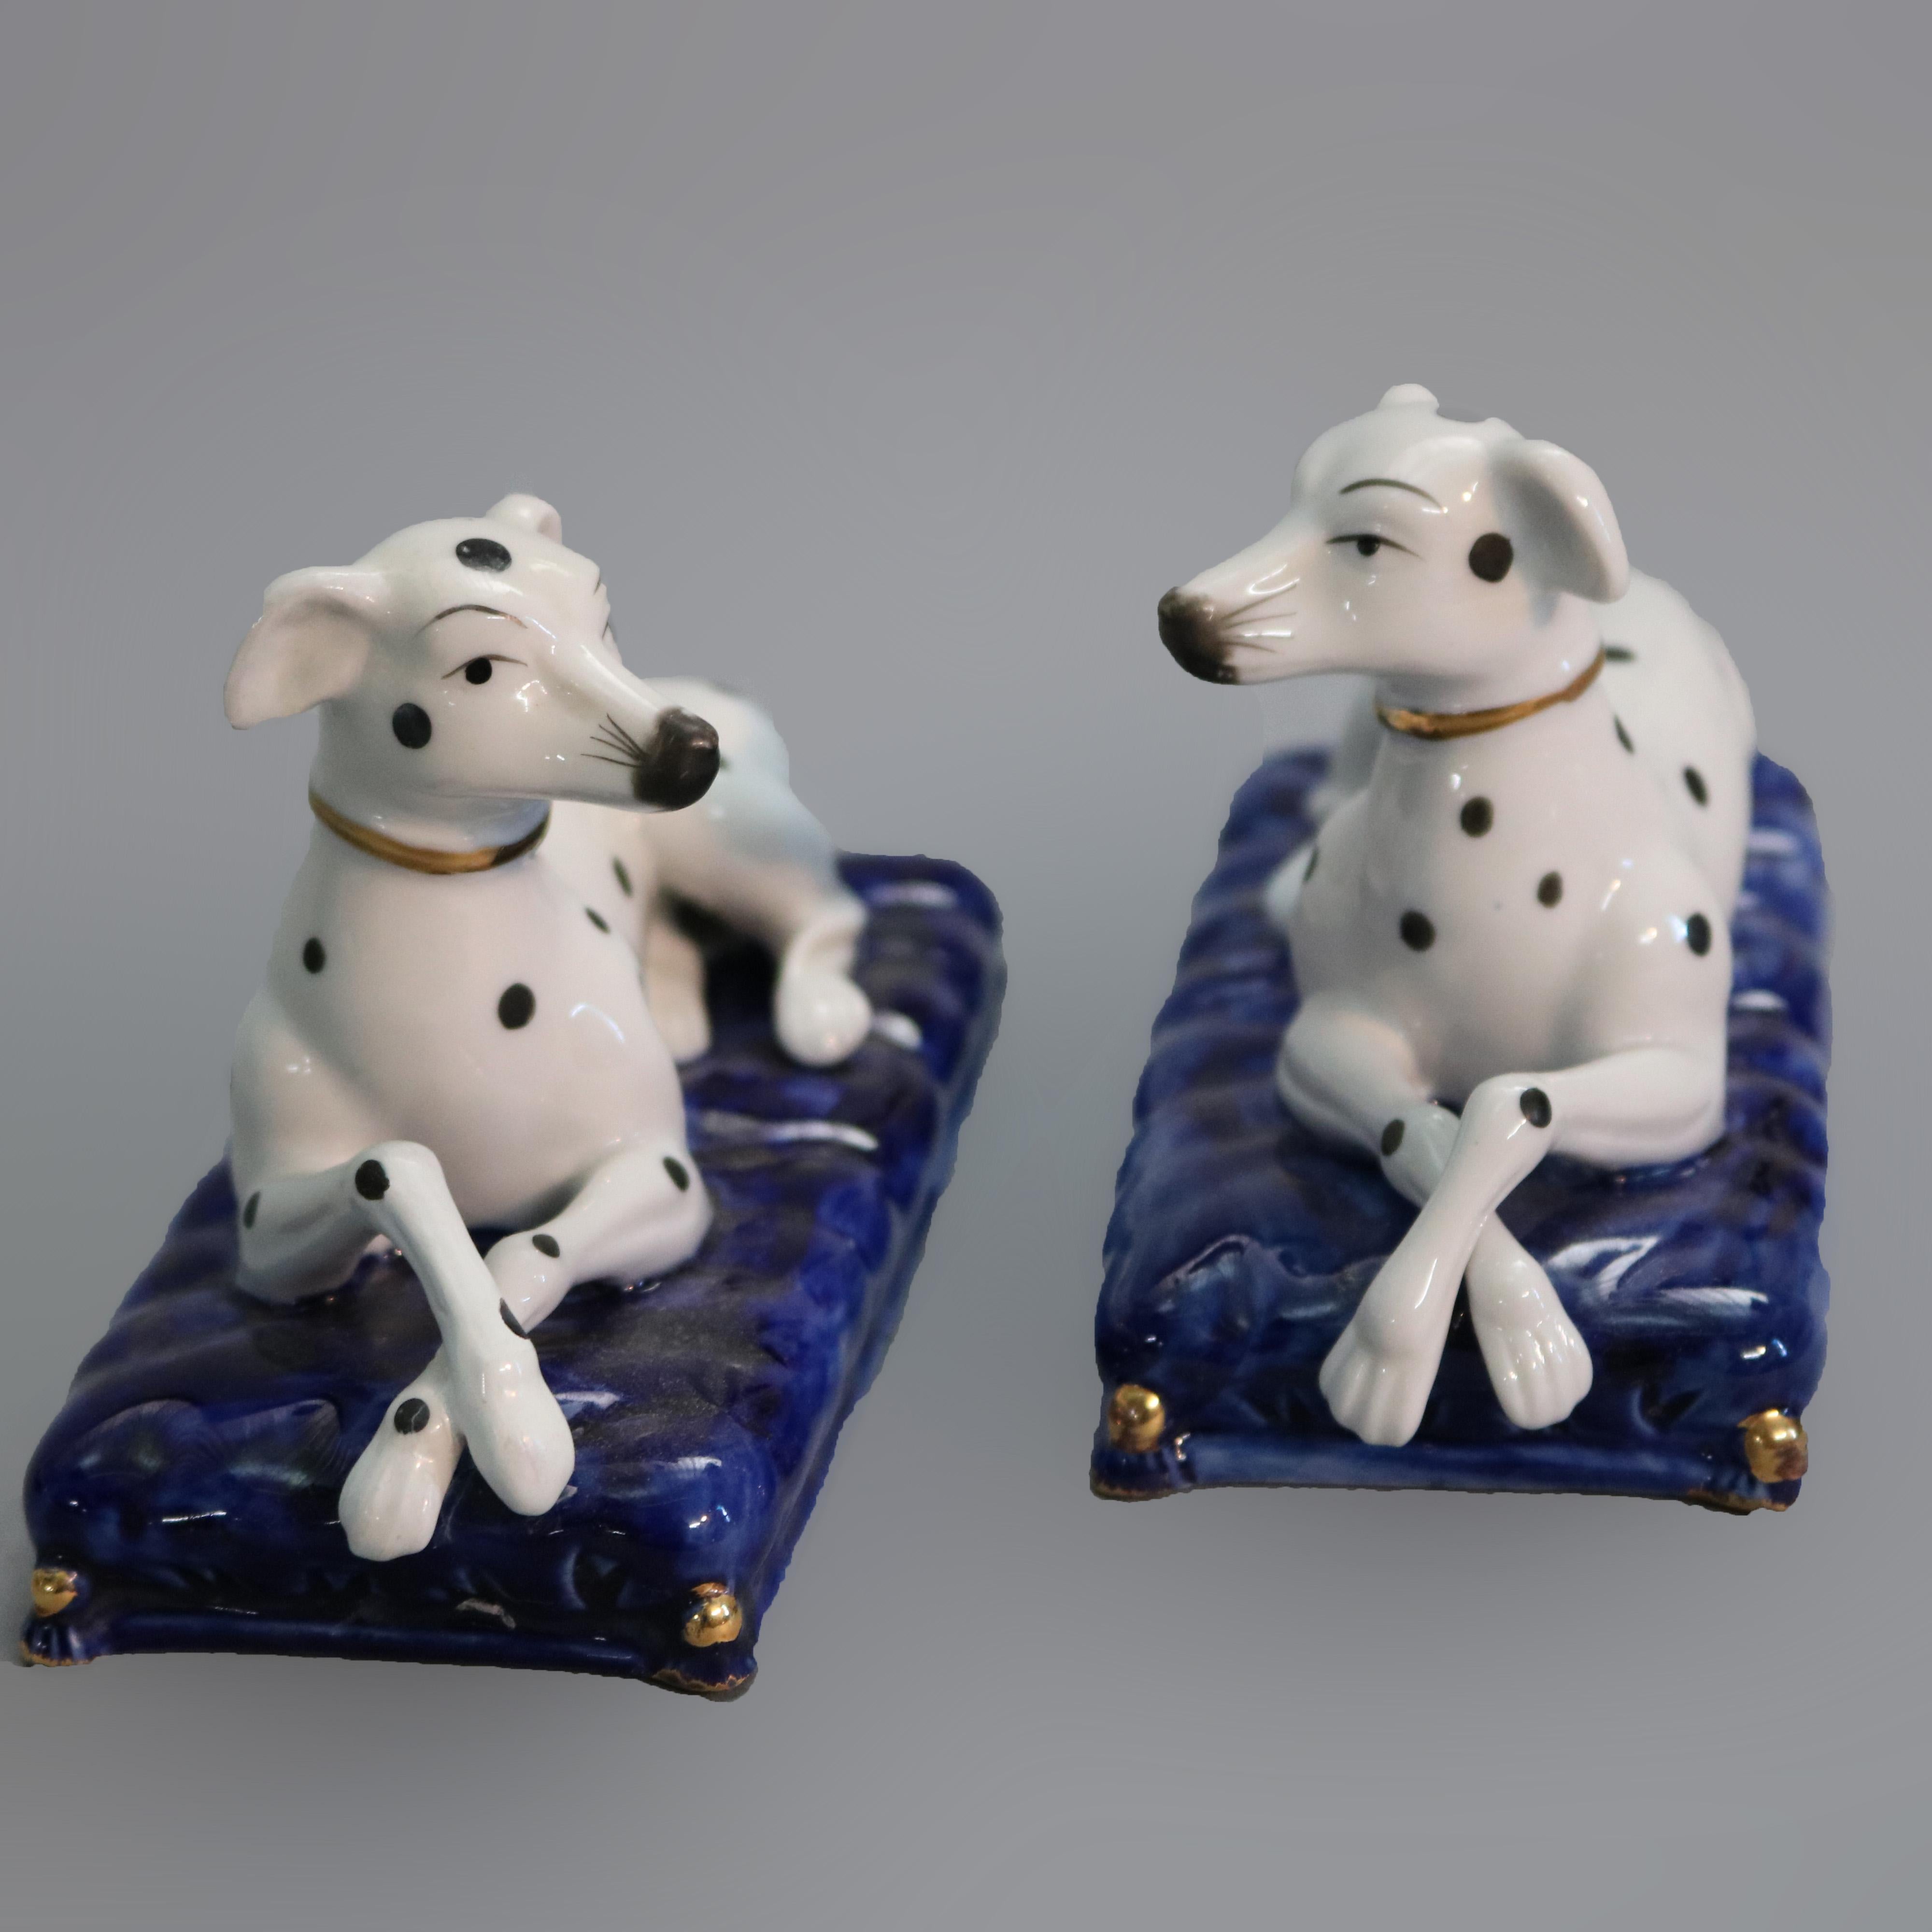 An antique figural pair of English Staffordshire porcelain Dalmation dogs on marble painted bases as photographed, unsigned, 20th century

Measures: 2.25